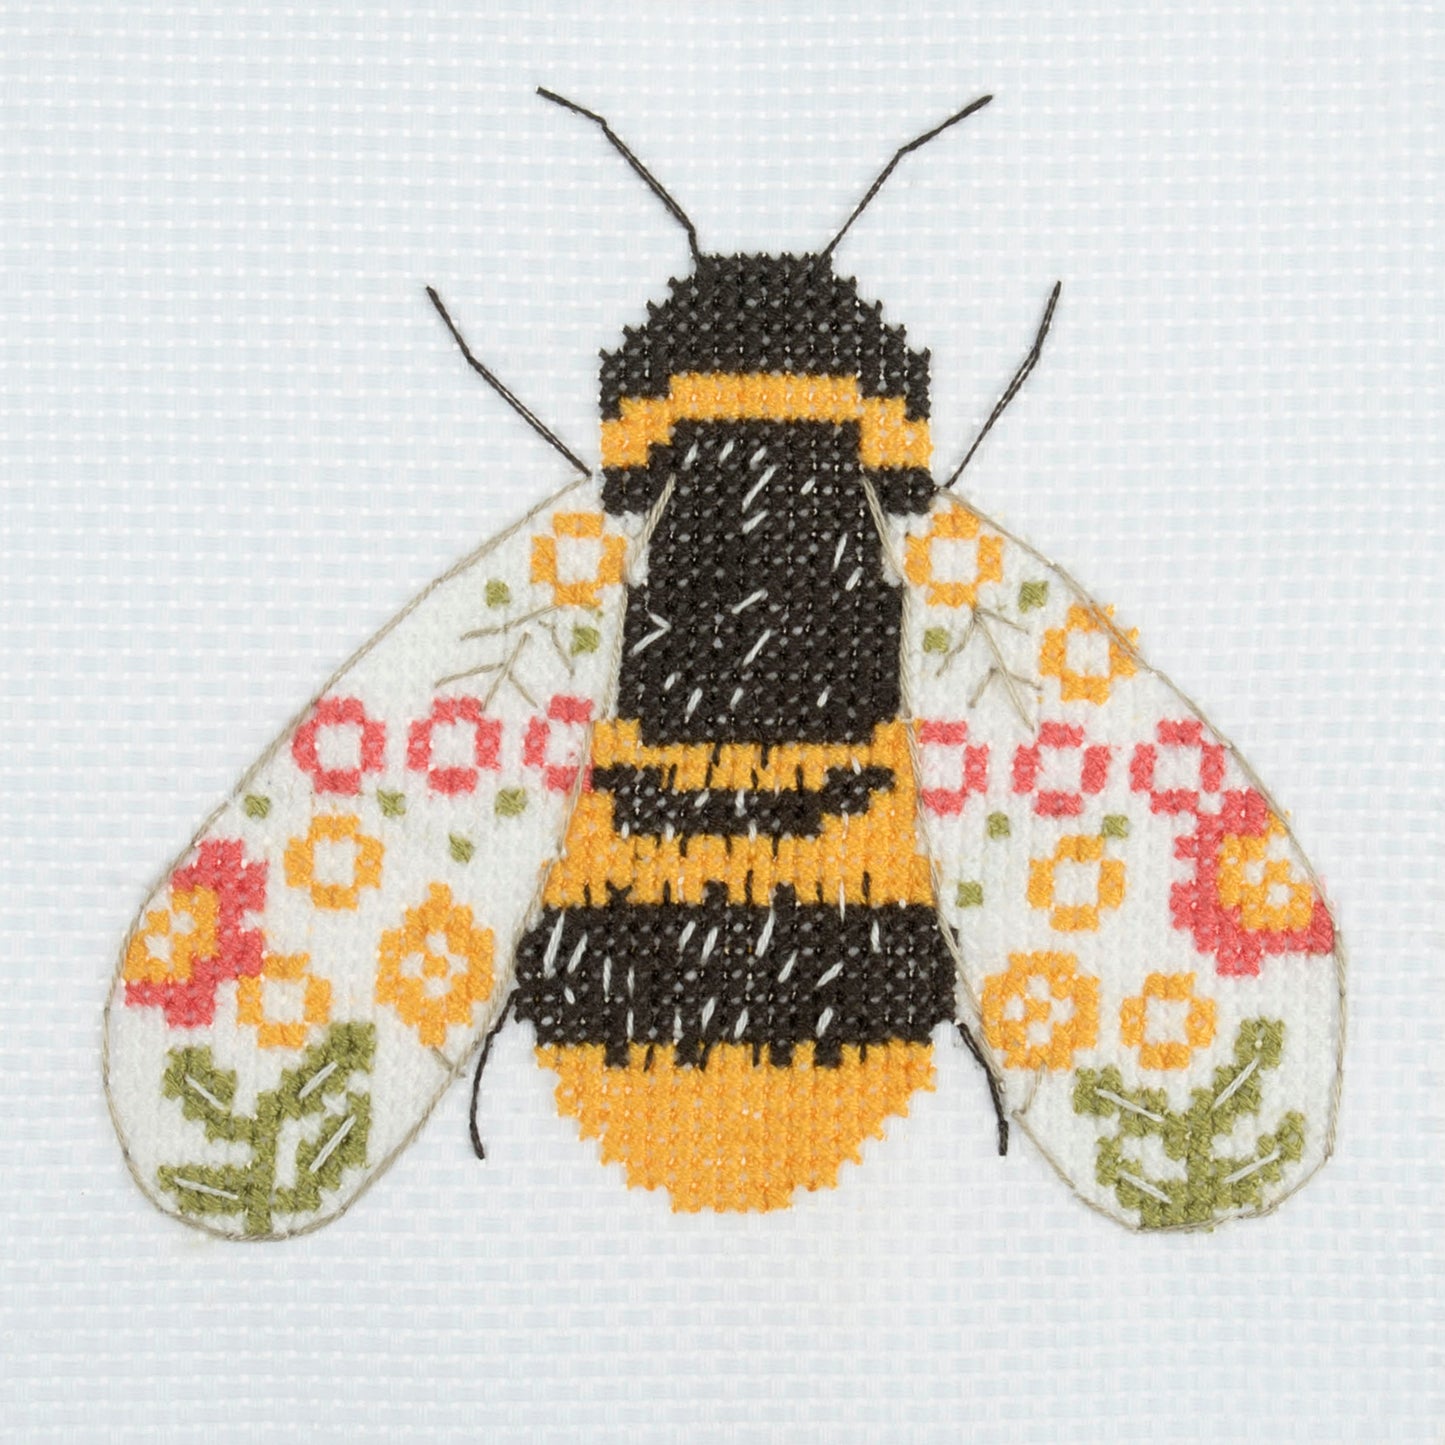 Trimits Counted Cross Stitch Kit Bee